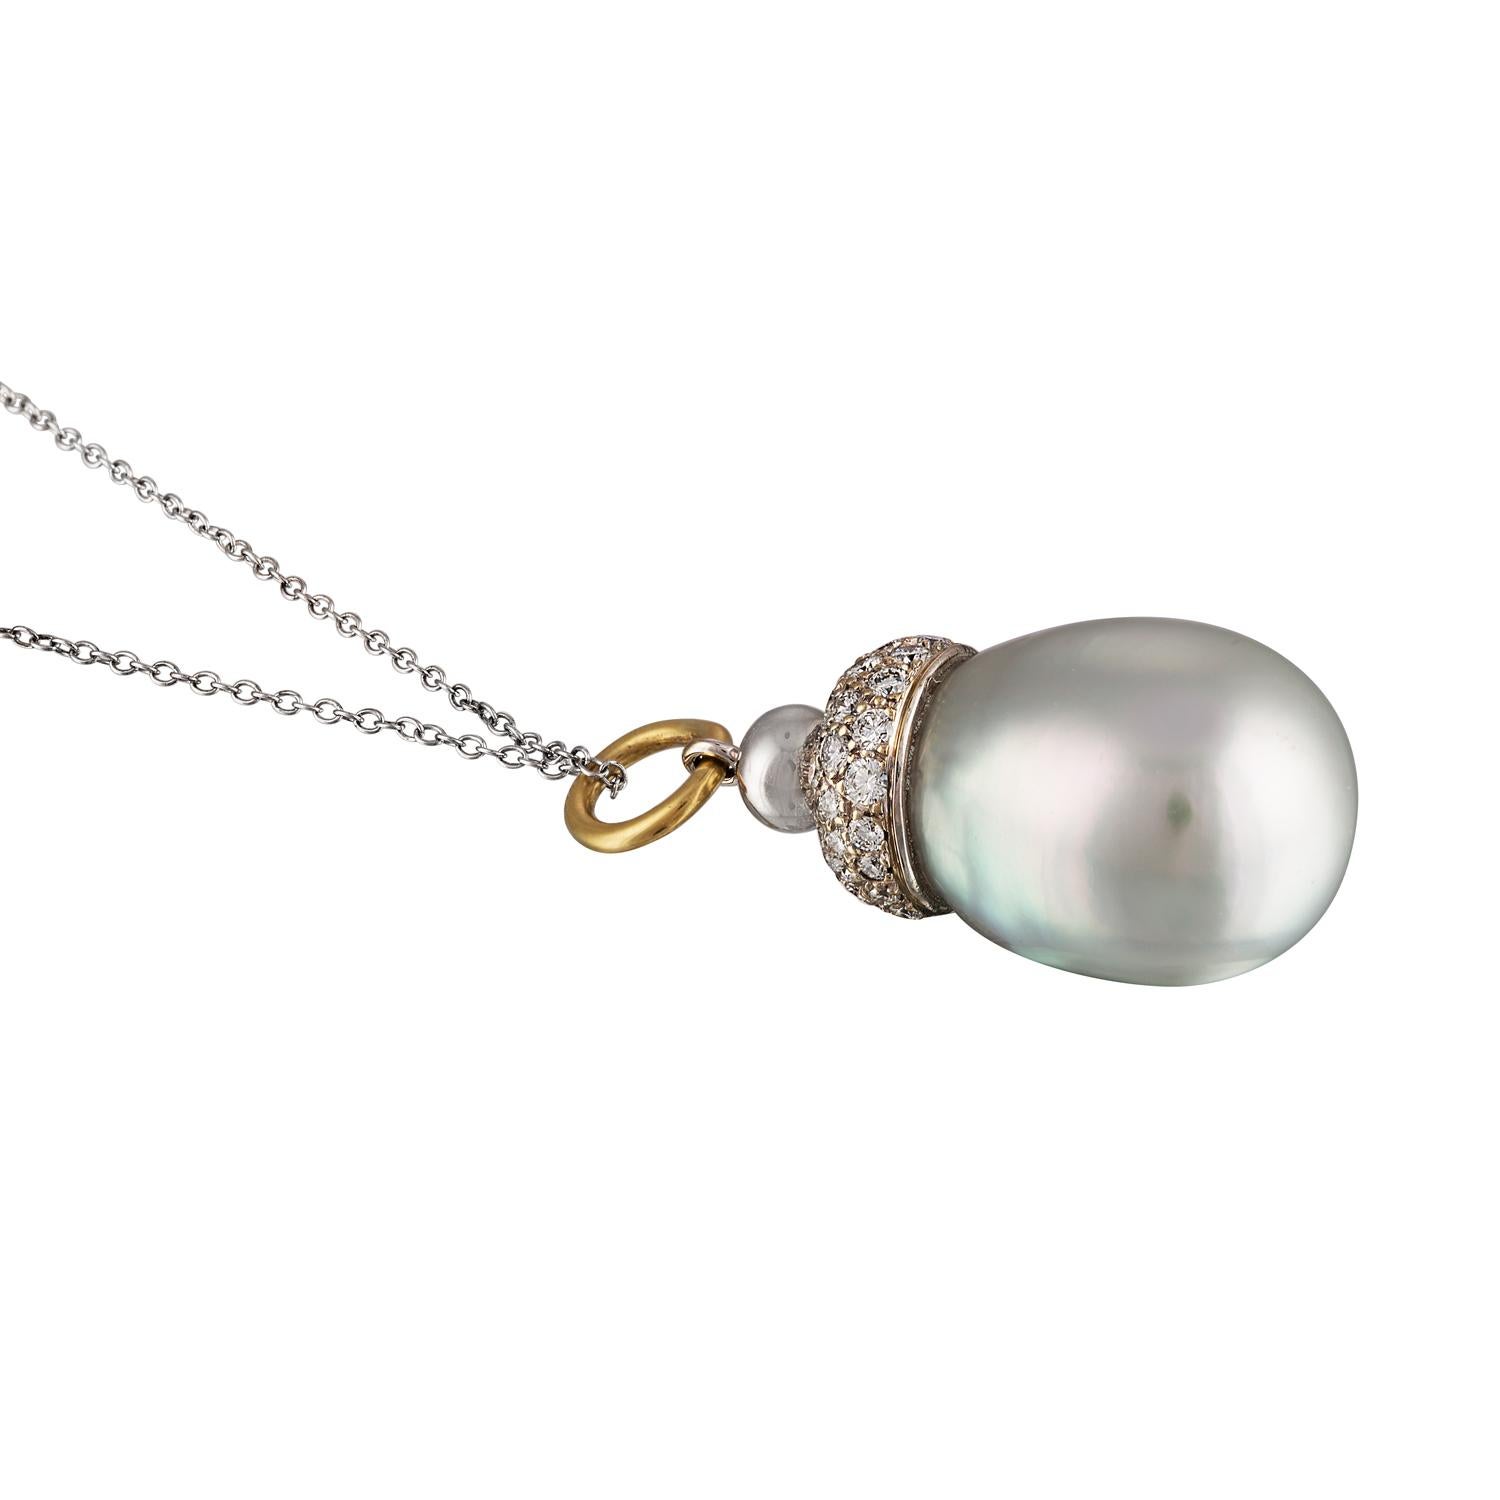 This pendant features an oversize South Sea white baroque cultured pearl measure 16.3mm with a diamond pave cap consisting of 65 diamonds set in 14 karat white gold.
The South Sea pearl has excellent luster with strong silver/blue overtones.  
This